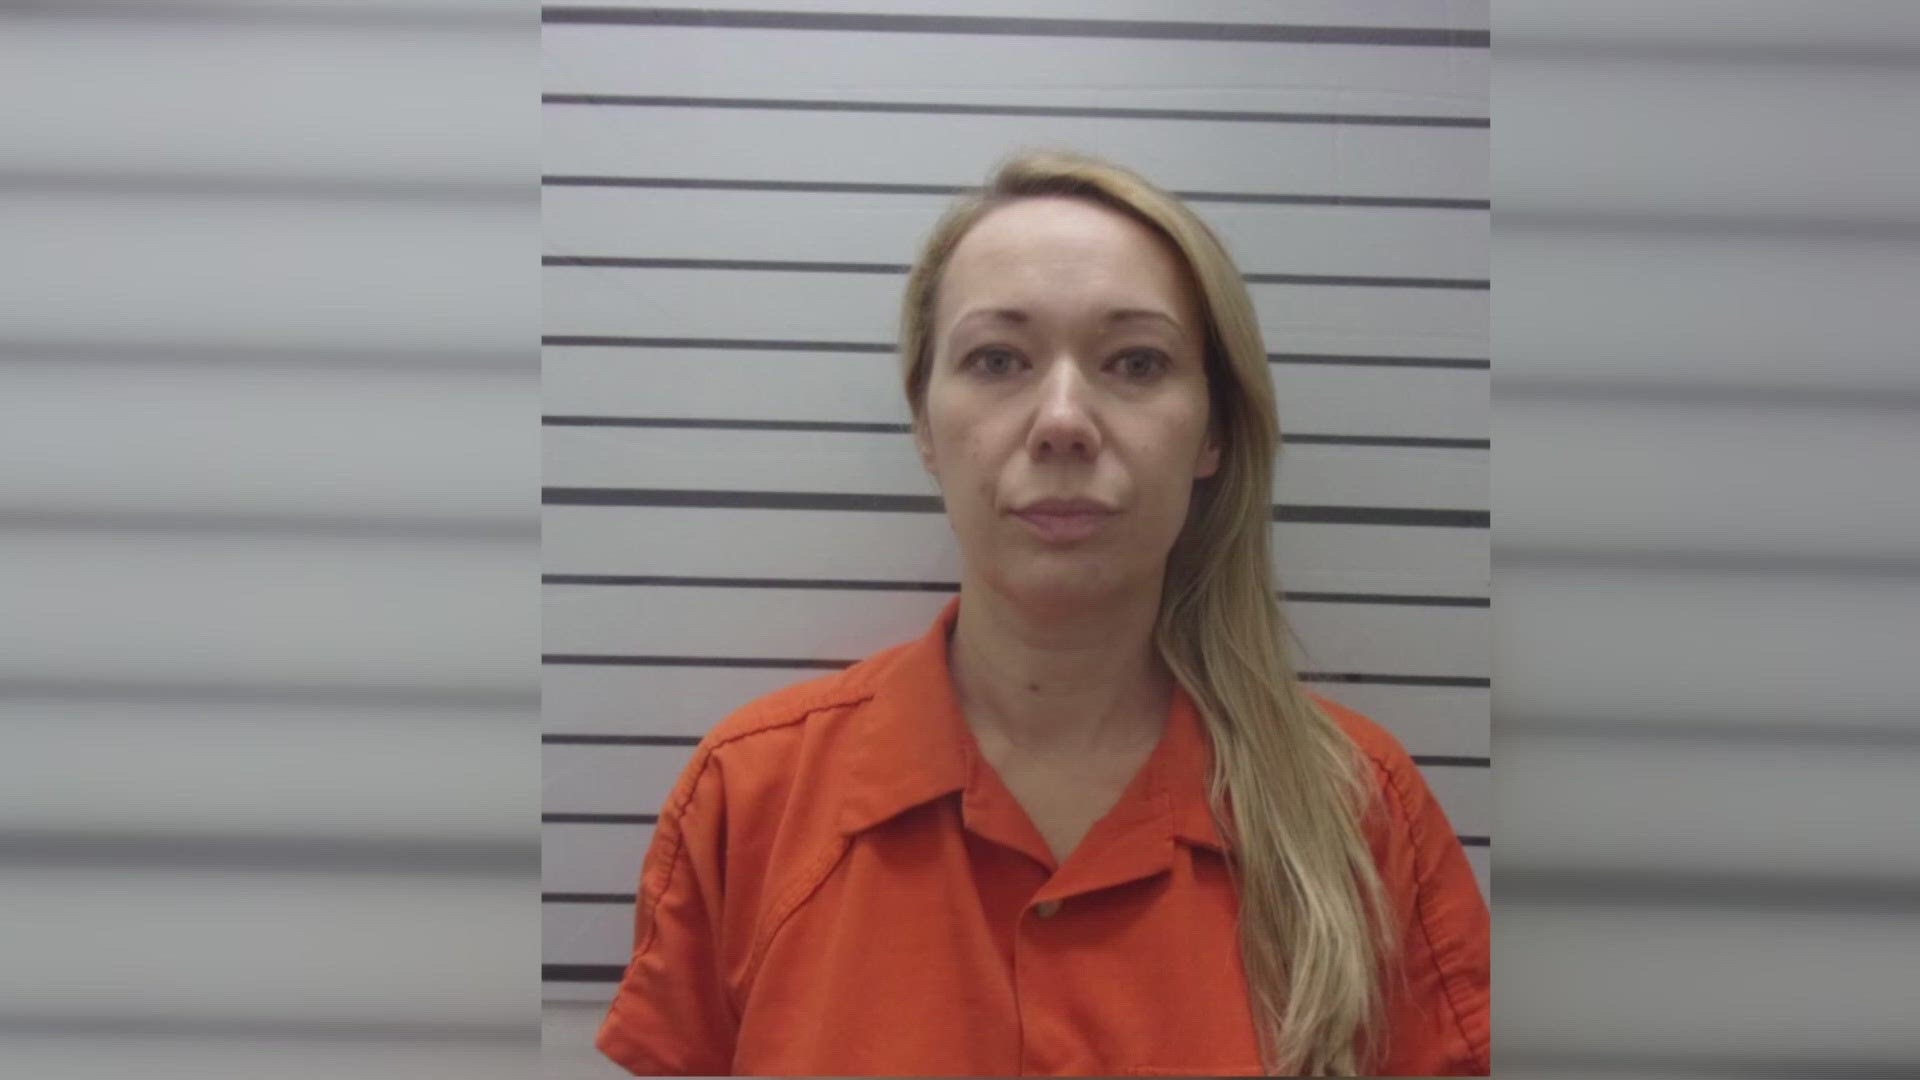 Carie Hallford is being held on 190 counts of abuse of a corpse, as well as dozens of other felony charges that include theft, money laundering and forgery.